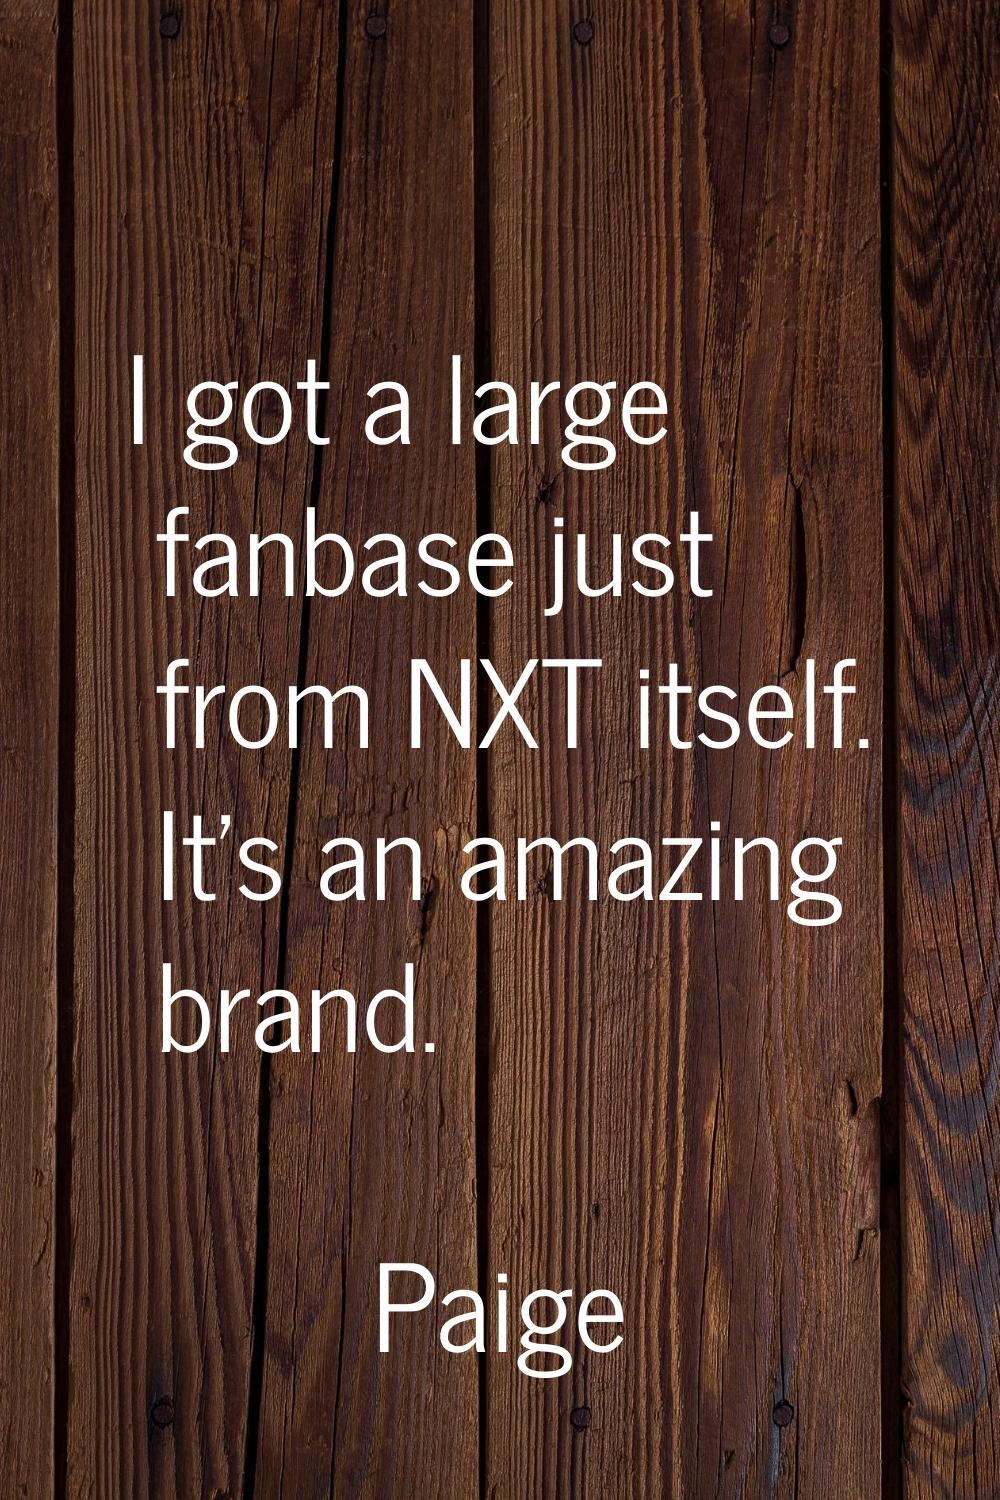 I got a large fanbase just from NXT itself. It's an amazing brand.